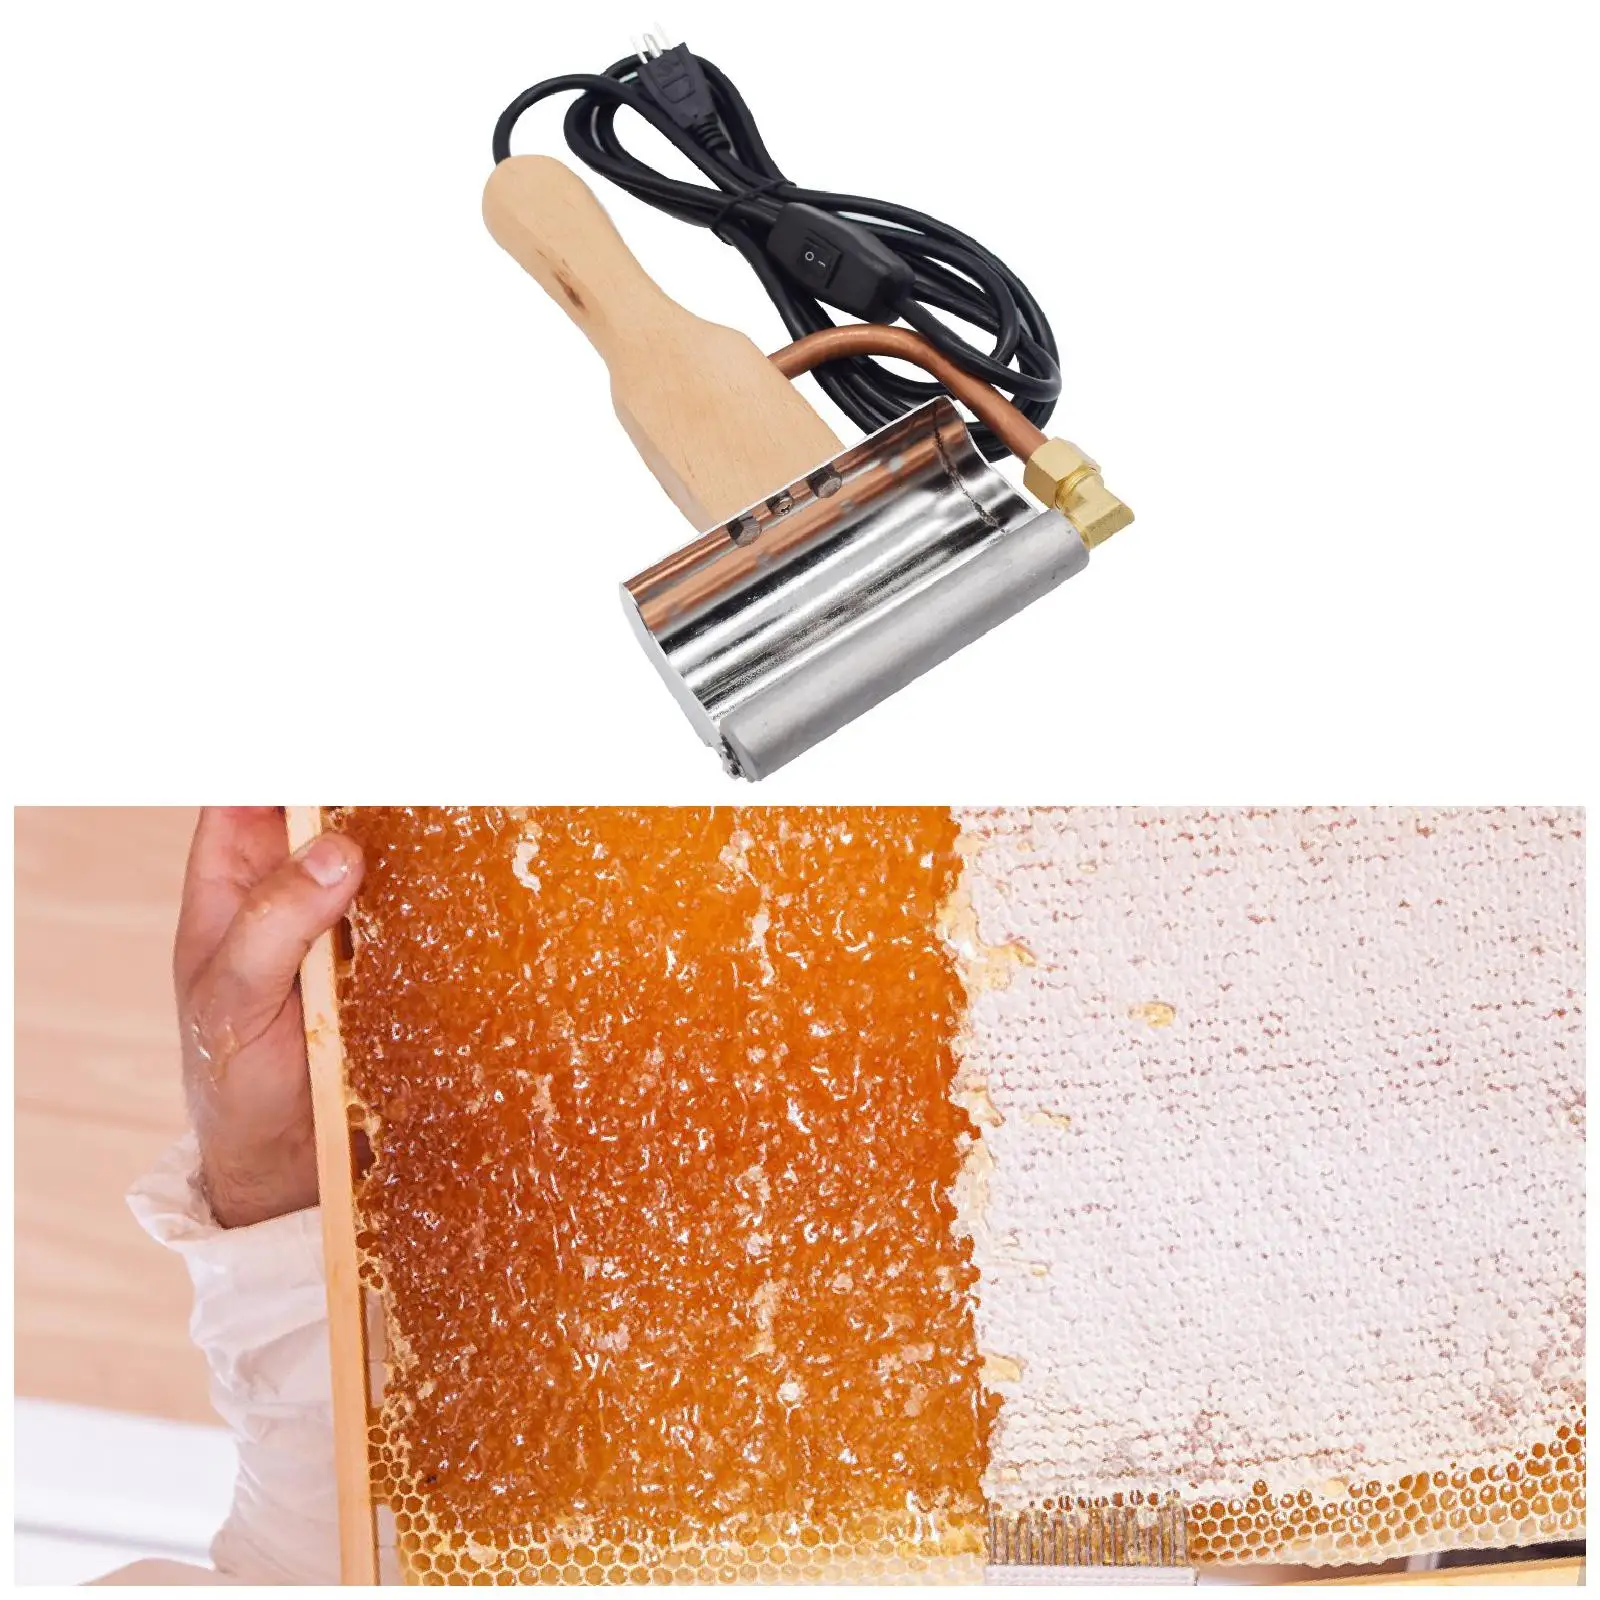 

Electric Honey Uncapping Knife with Wood Handle Beekeeping Tools US Adapter Bee Knife Scraper Bee Extractor for Honey Combs